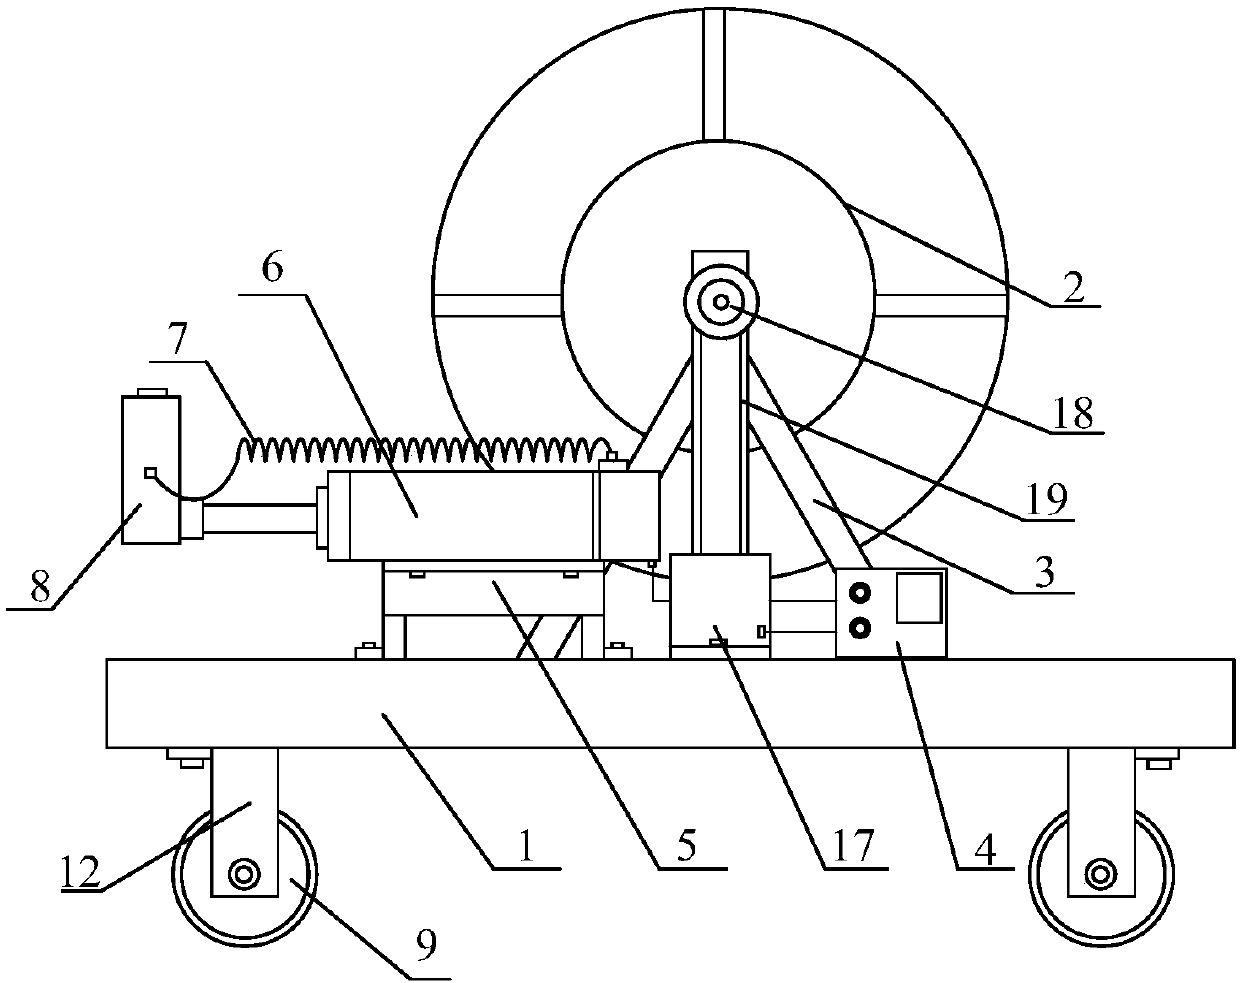 Automatic threading machine with automatic wire-twisting function